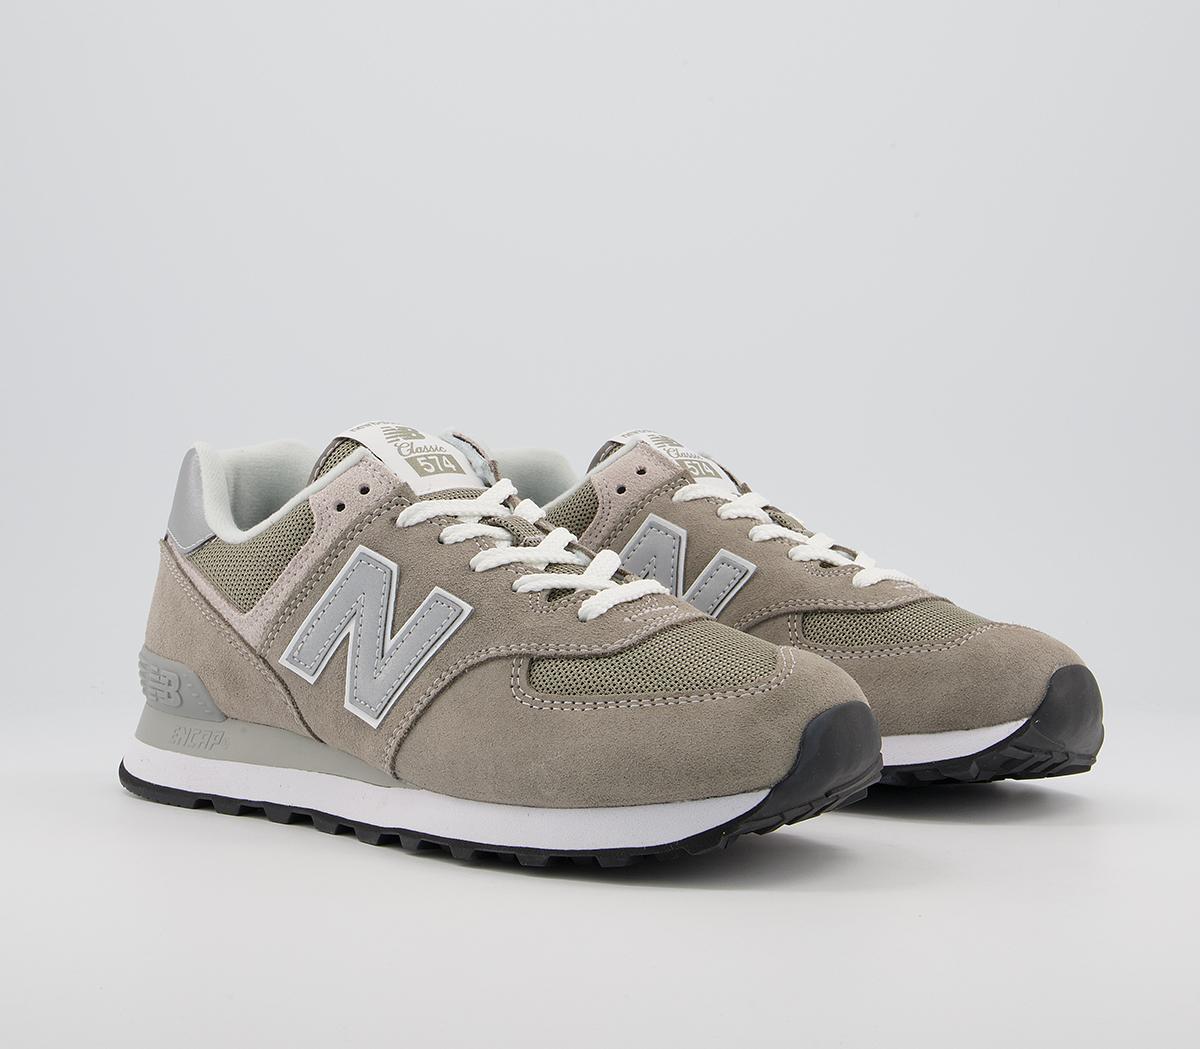 New Balance 574 Trainers Grey - His trainers